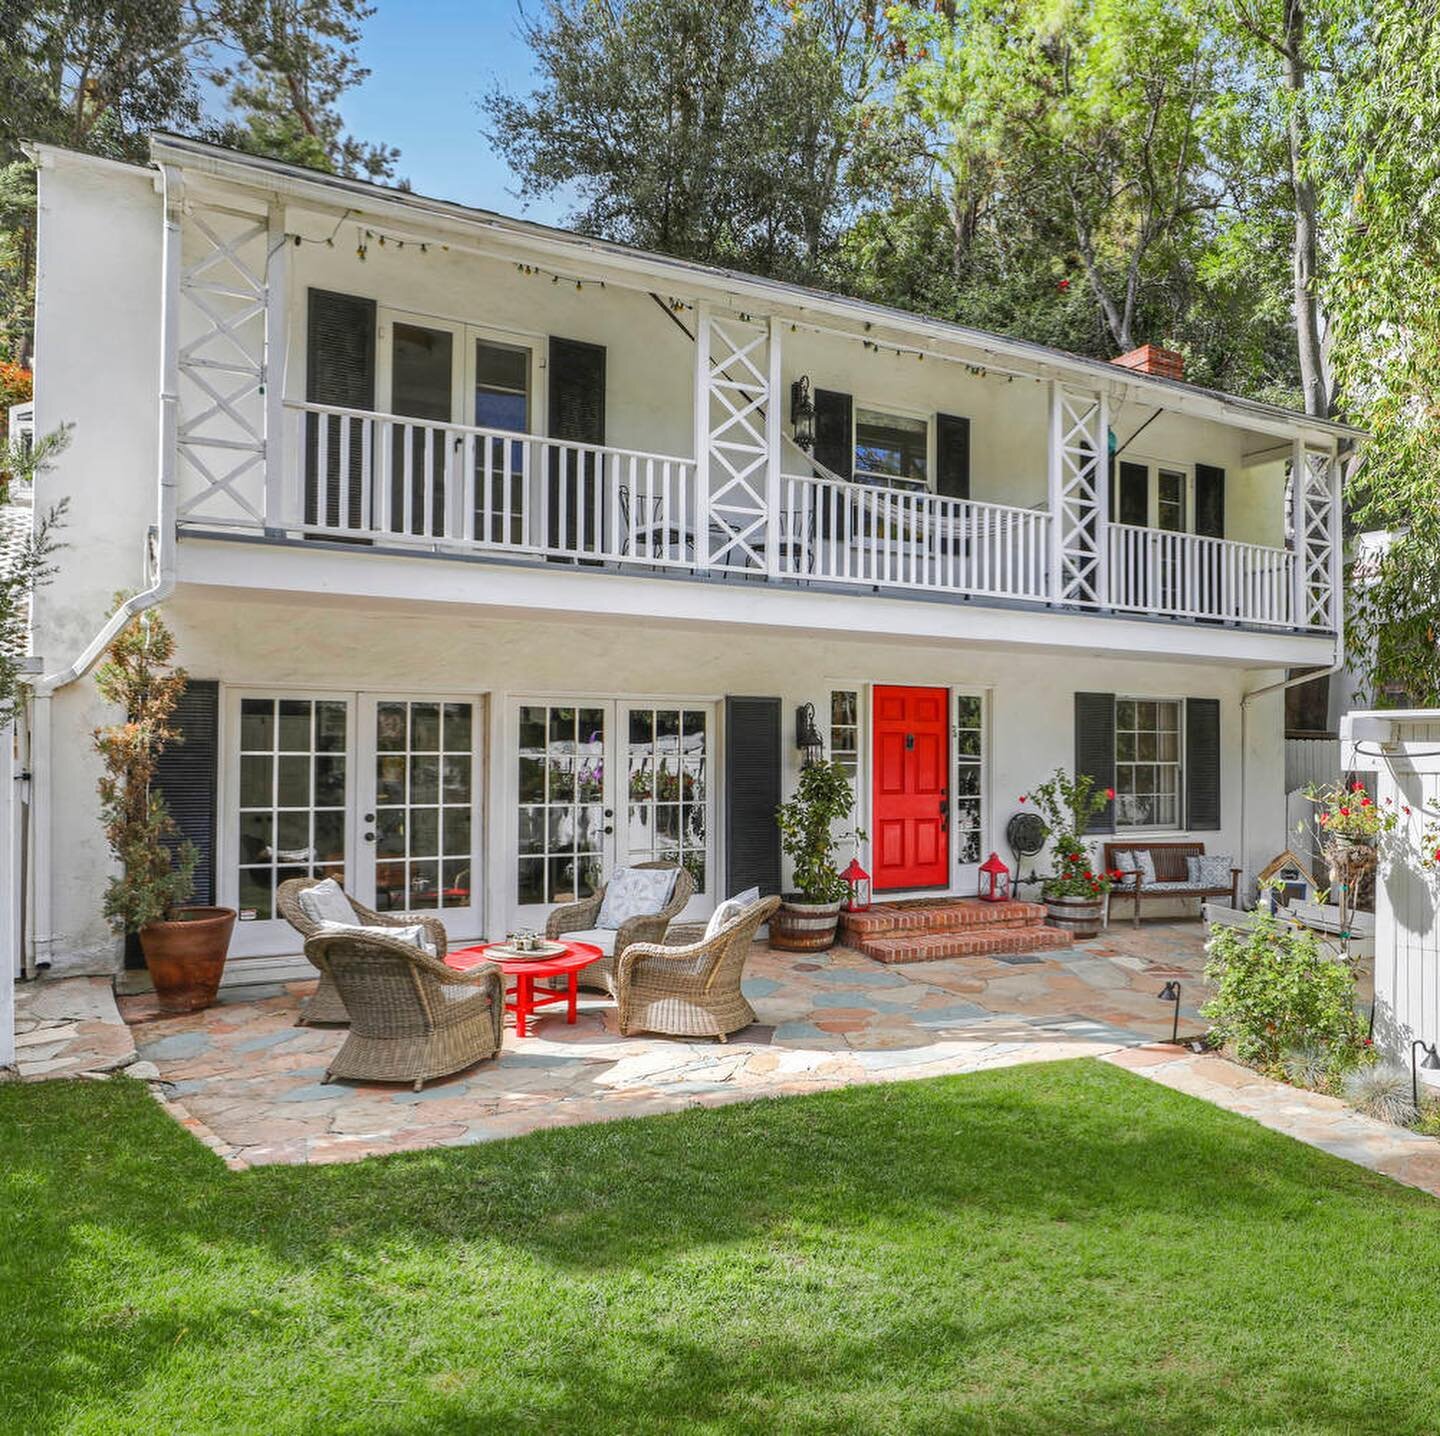 ✨:: New Listing :: ✨
A gorgeous 1936 Monterey Colonial in the Cahuenga Pass neighborhood of the Hollywood Hills. Large generous rooms. A gorgeous master bedroom with stone fireplace and additional den/office. Beautiful living room with built in bar a